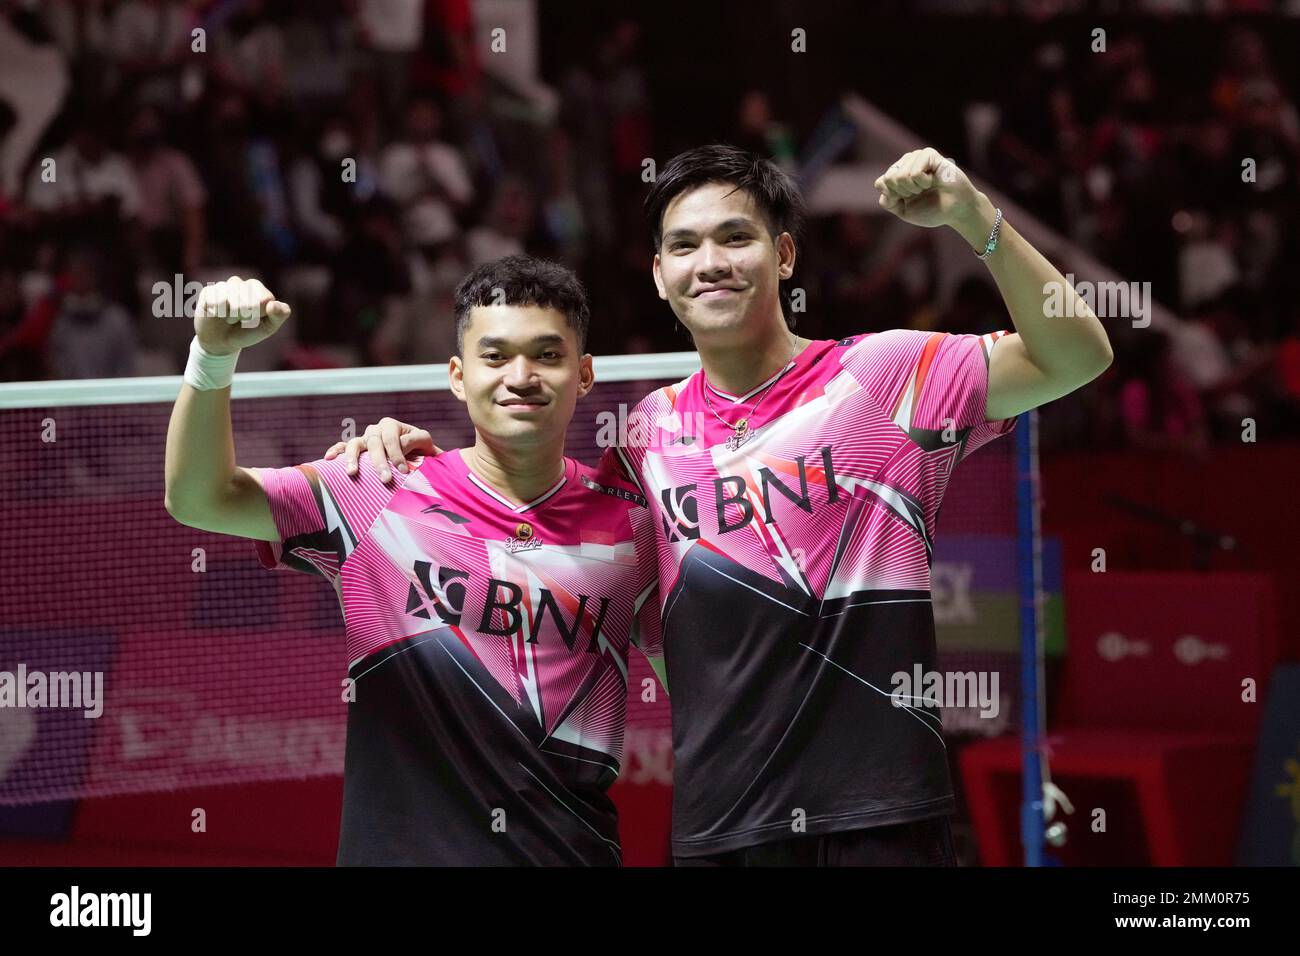 Indonesias Daniel Marthin, right, and Leo Rolly Carnando celebrate with their gold medals after defeating compatriots Pramudya Kusumawardana and Yeremia Rambitan in the mens doubles badminton final match at the 31st Southeast